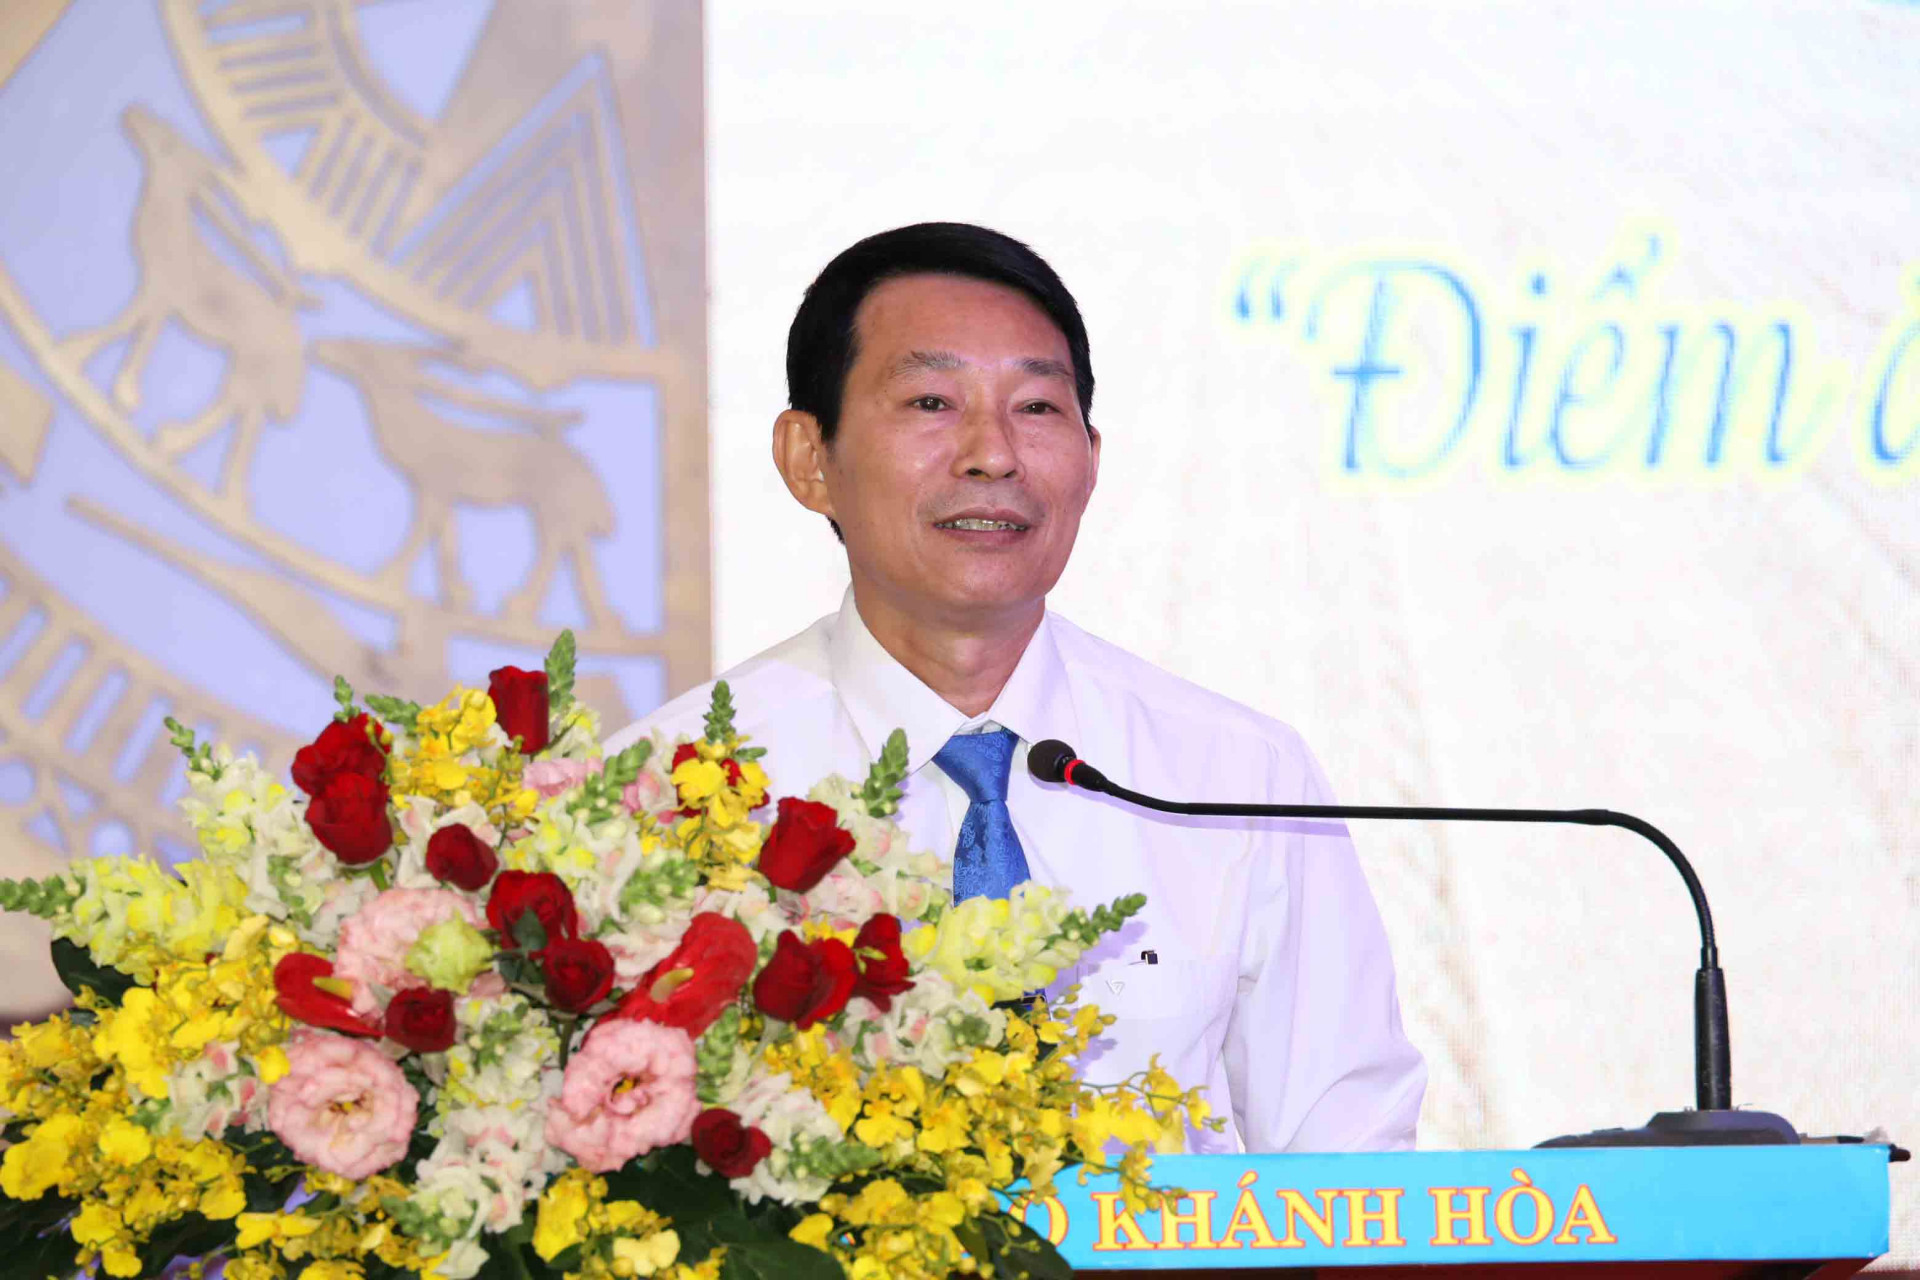 Dinh Van Thieu speaking at the press conference